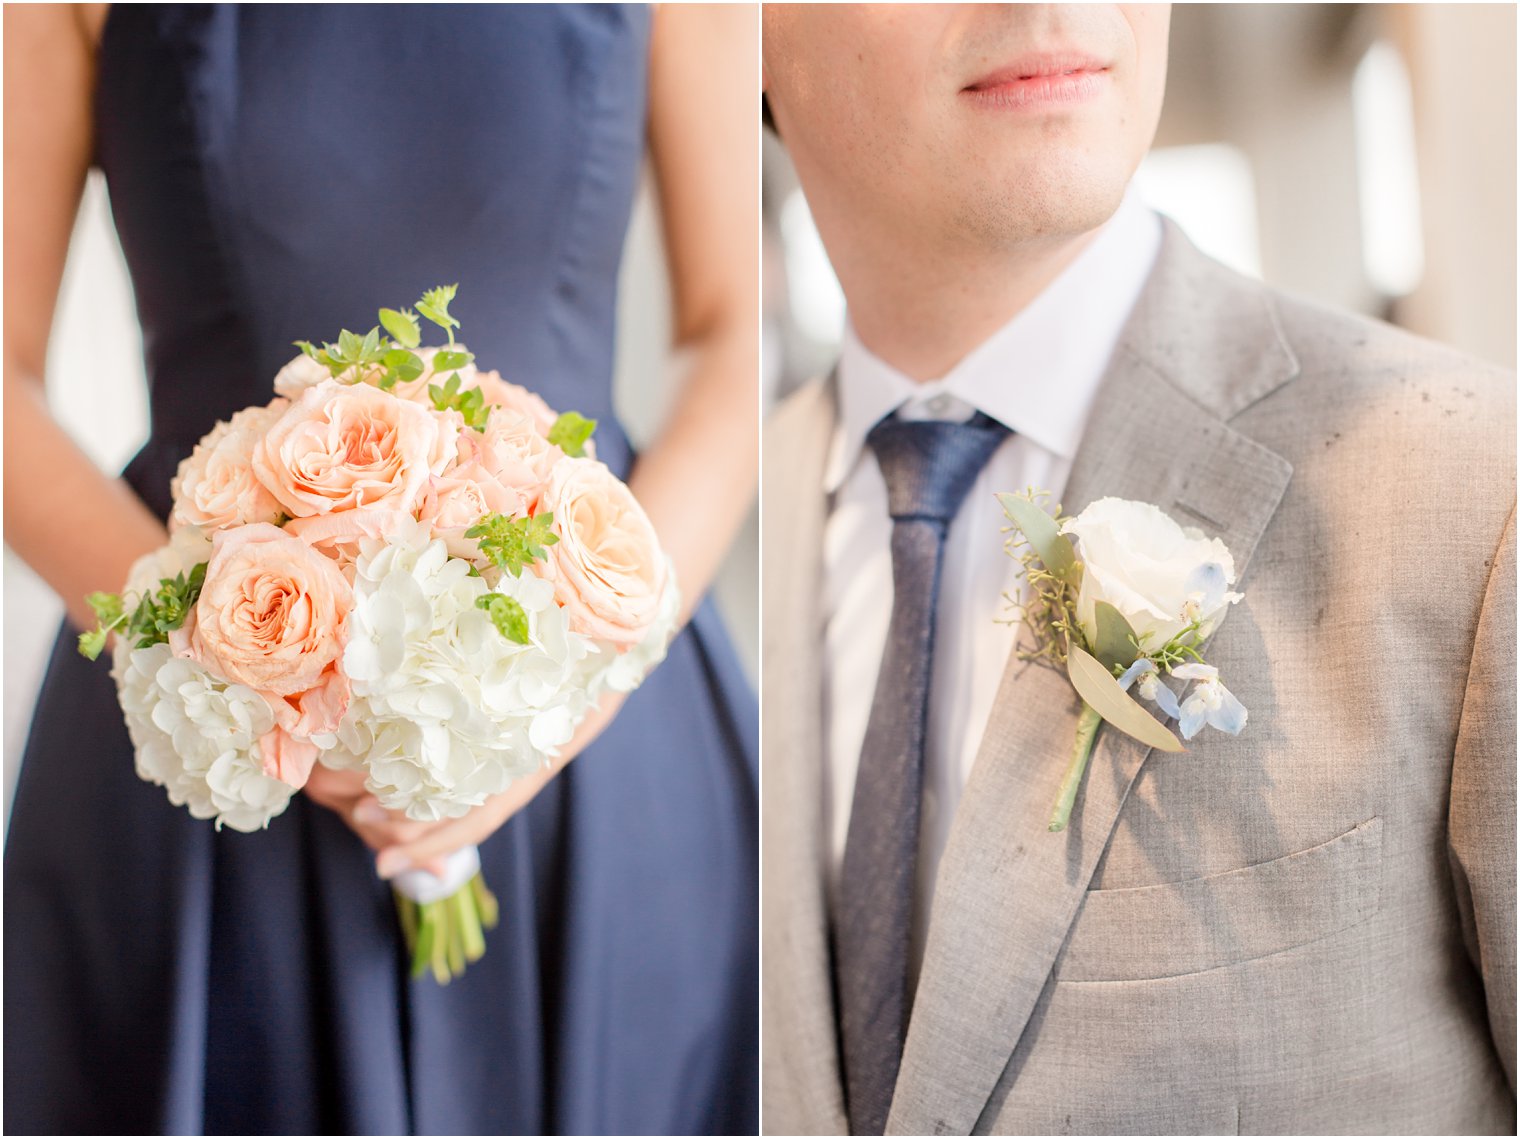 peach and ivory bridesmaid bouquet by Lily in the Valley photographed by Idalia Photography